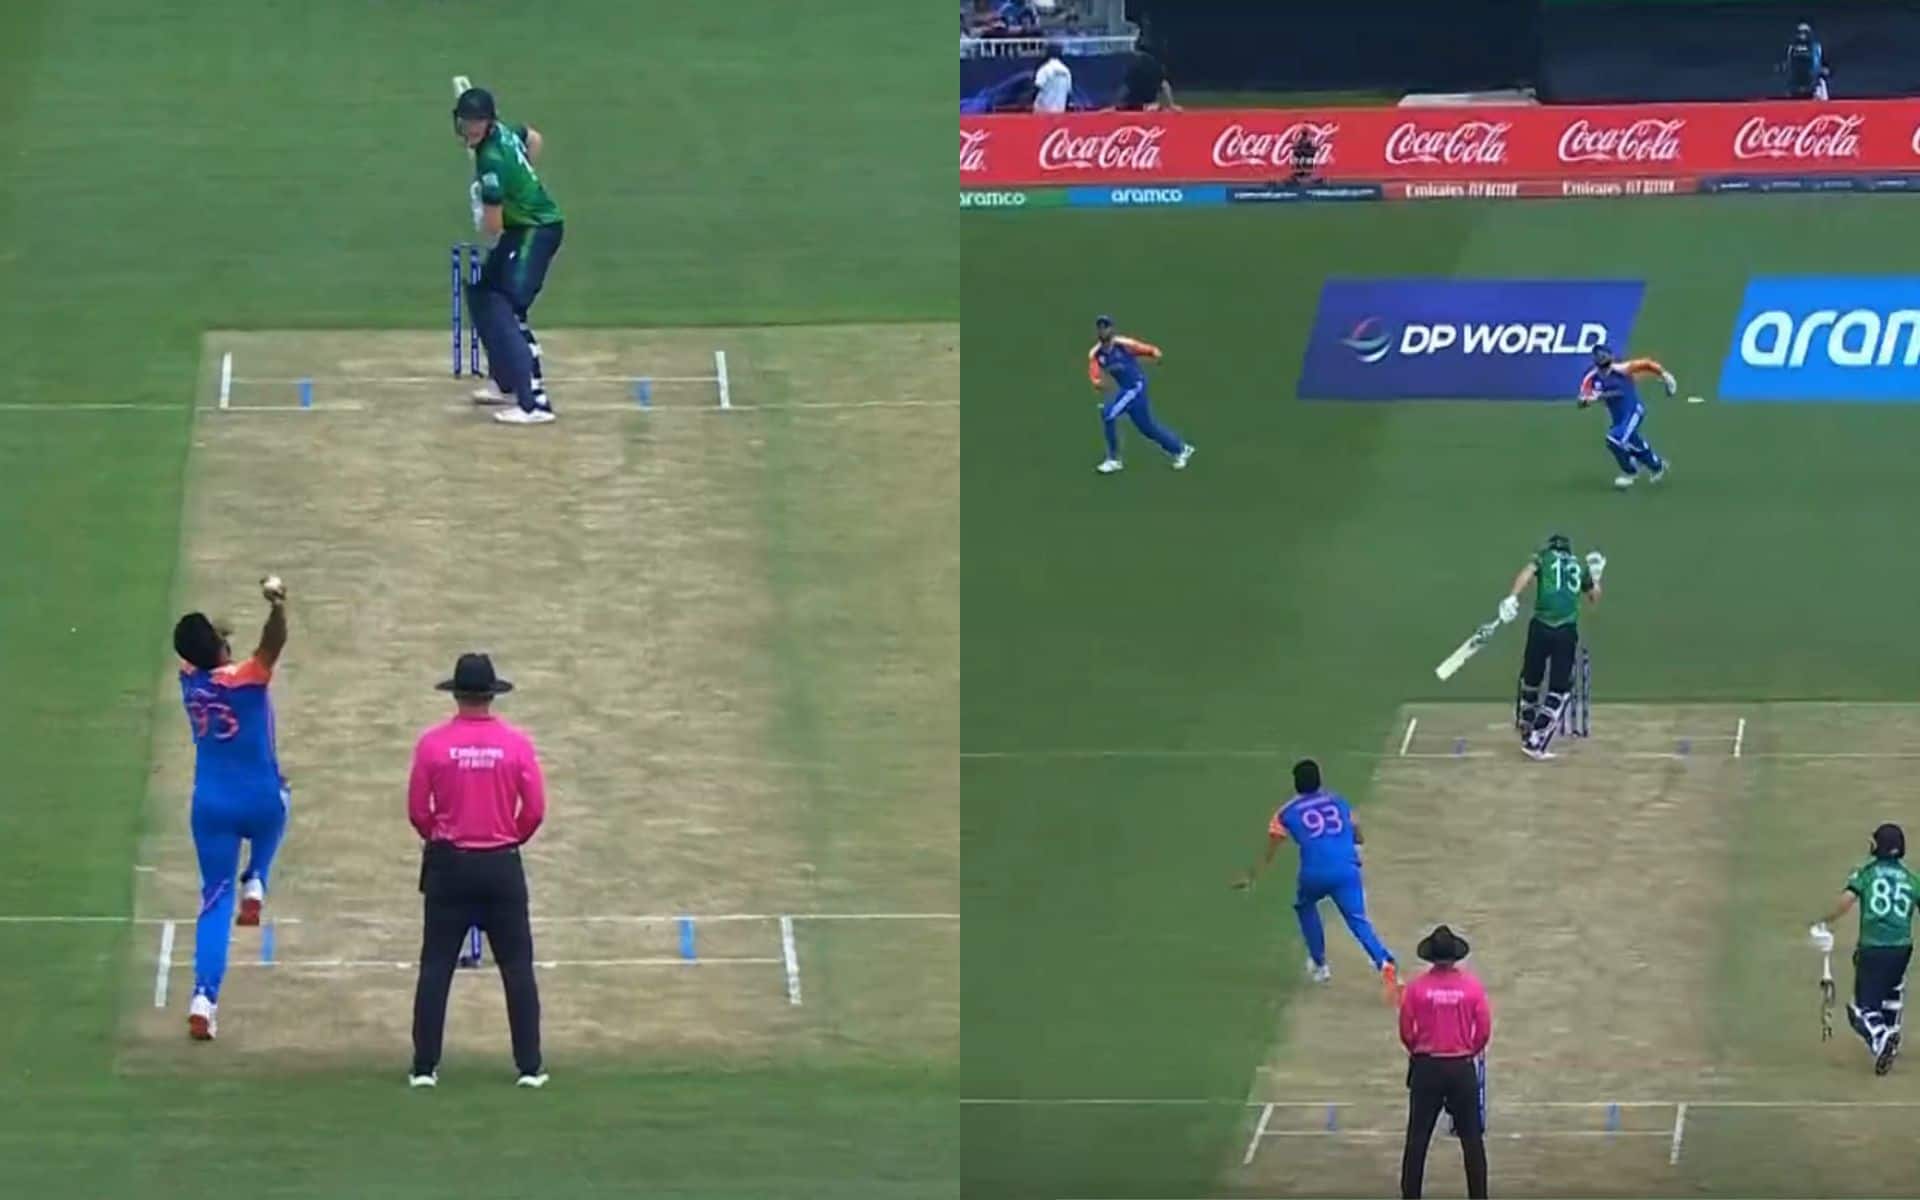 Bumrah was too smart for Harry Tector (X.com)